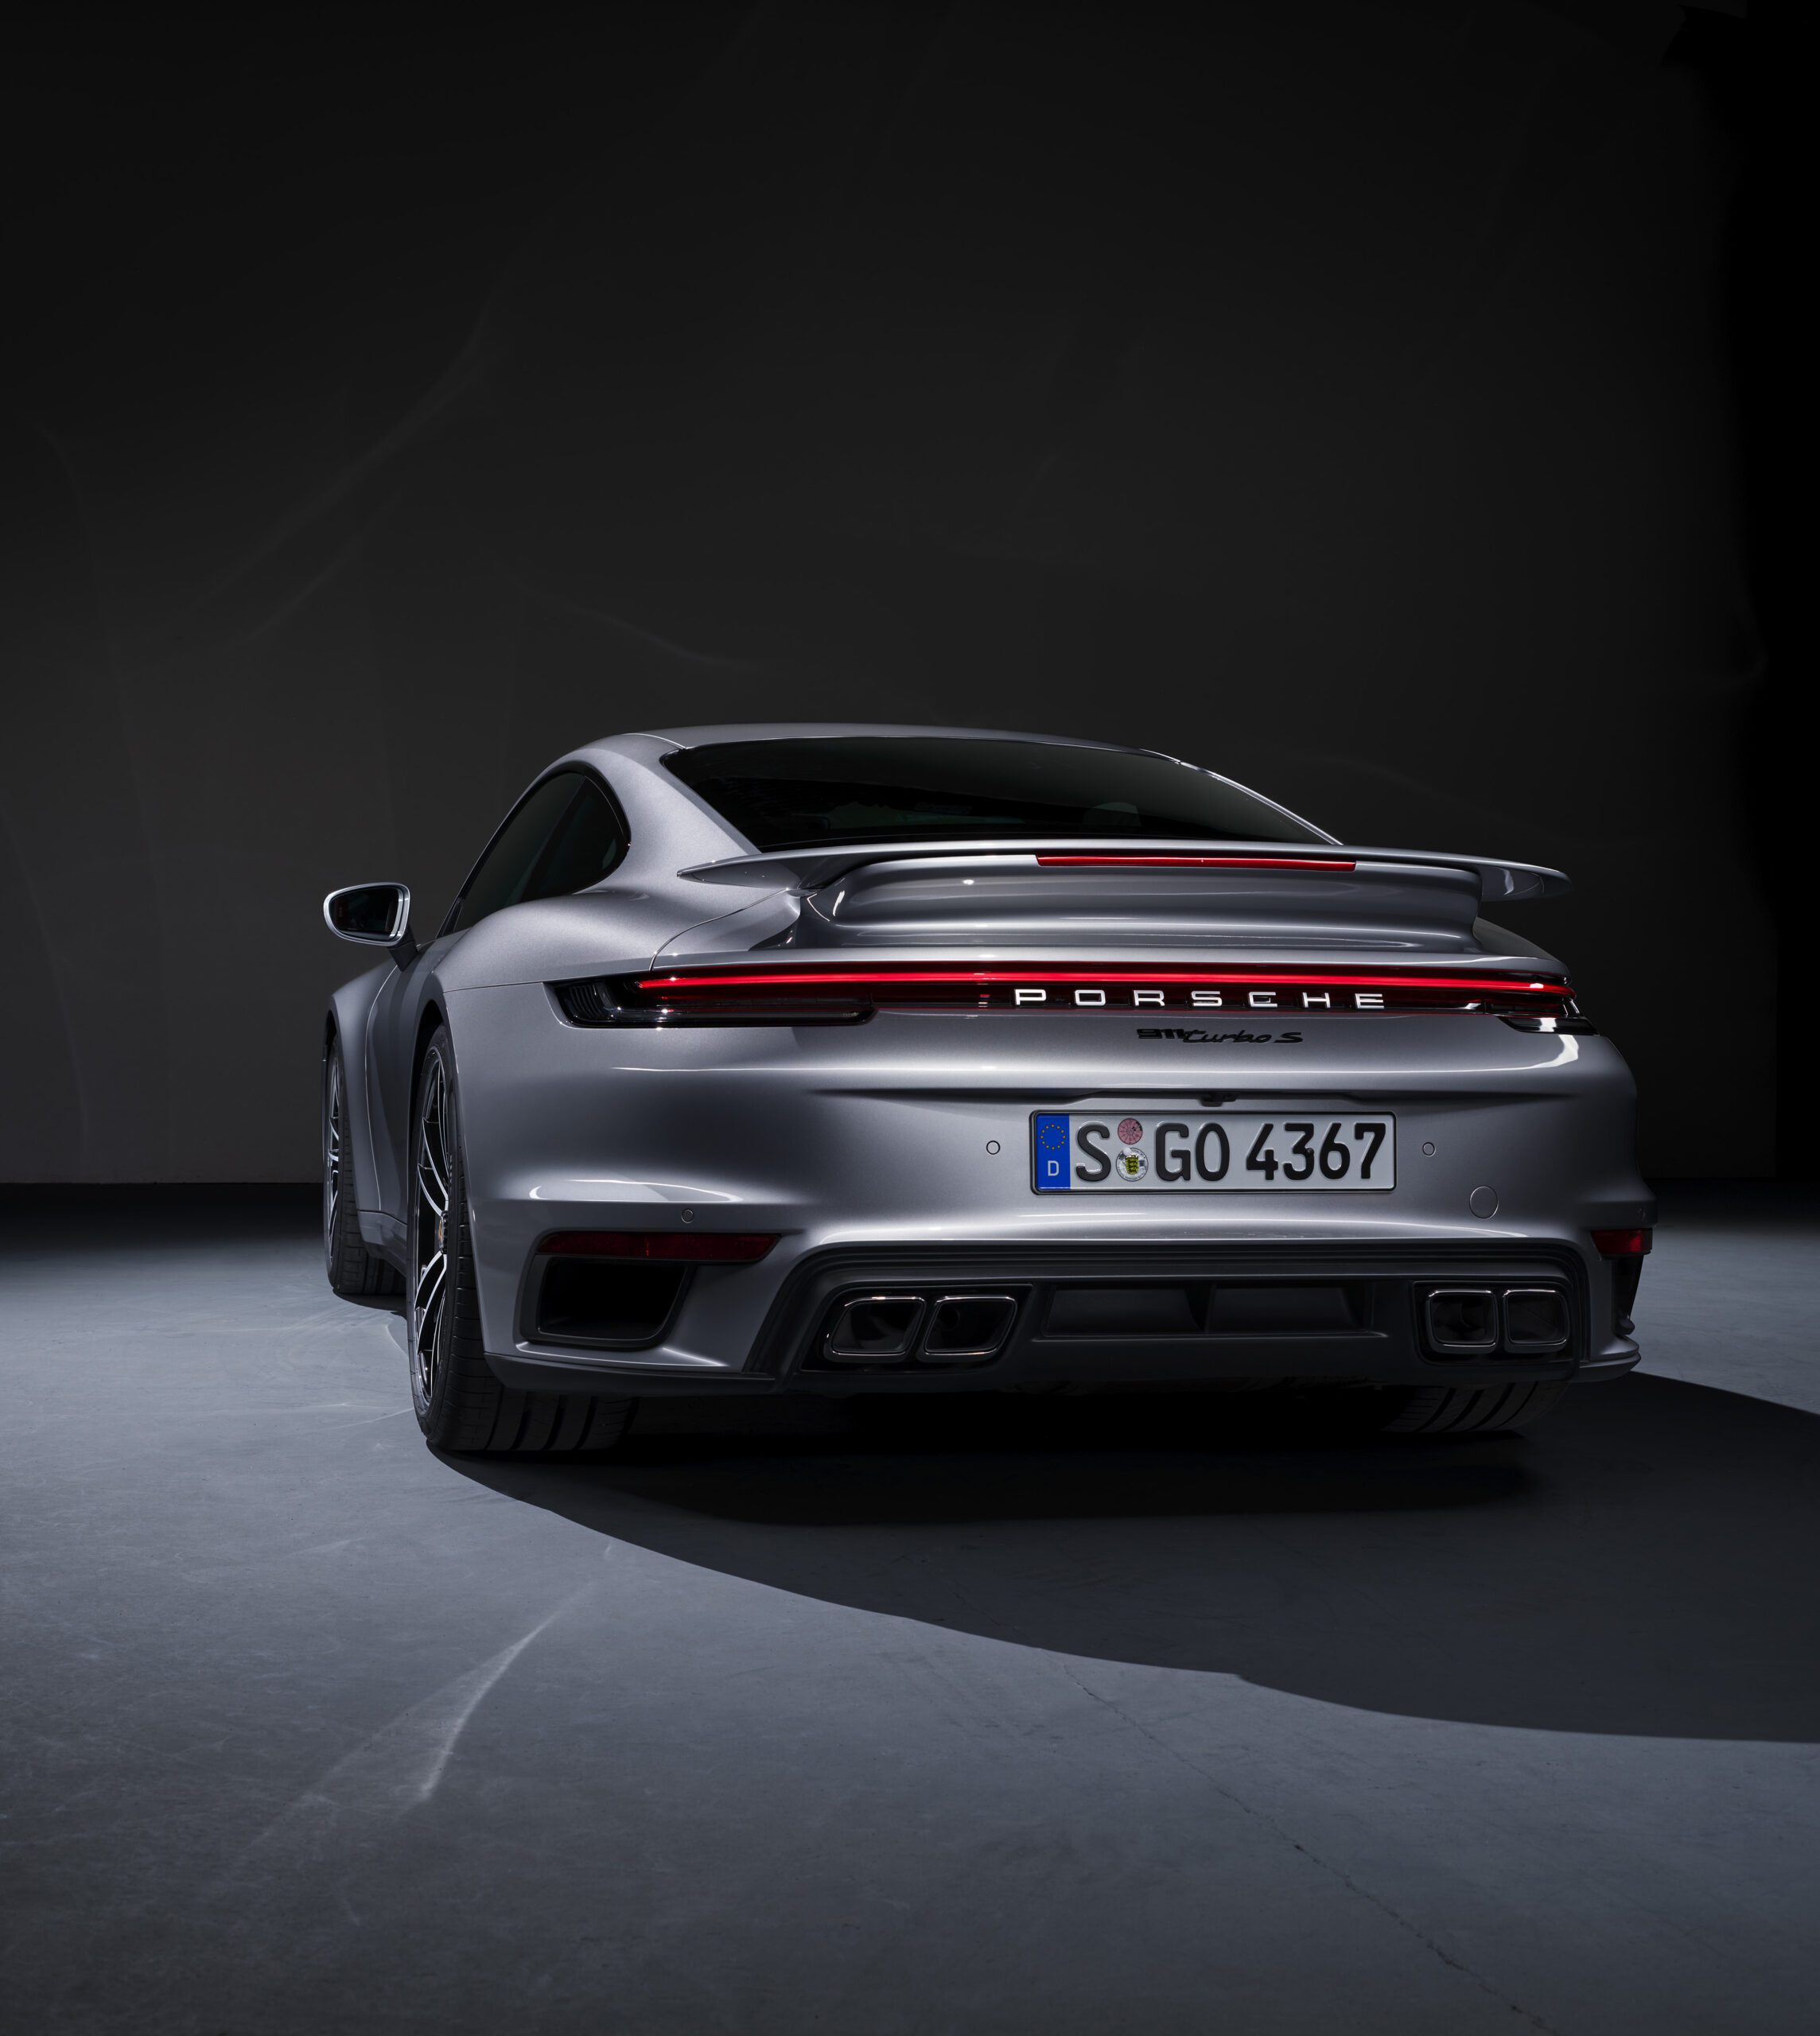 The Porsche 911 Turbo S is the latest in a long line of icons